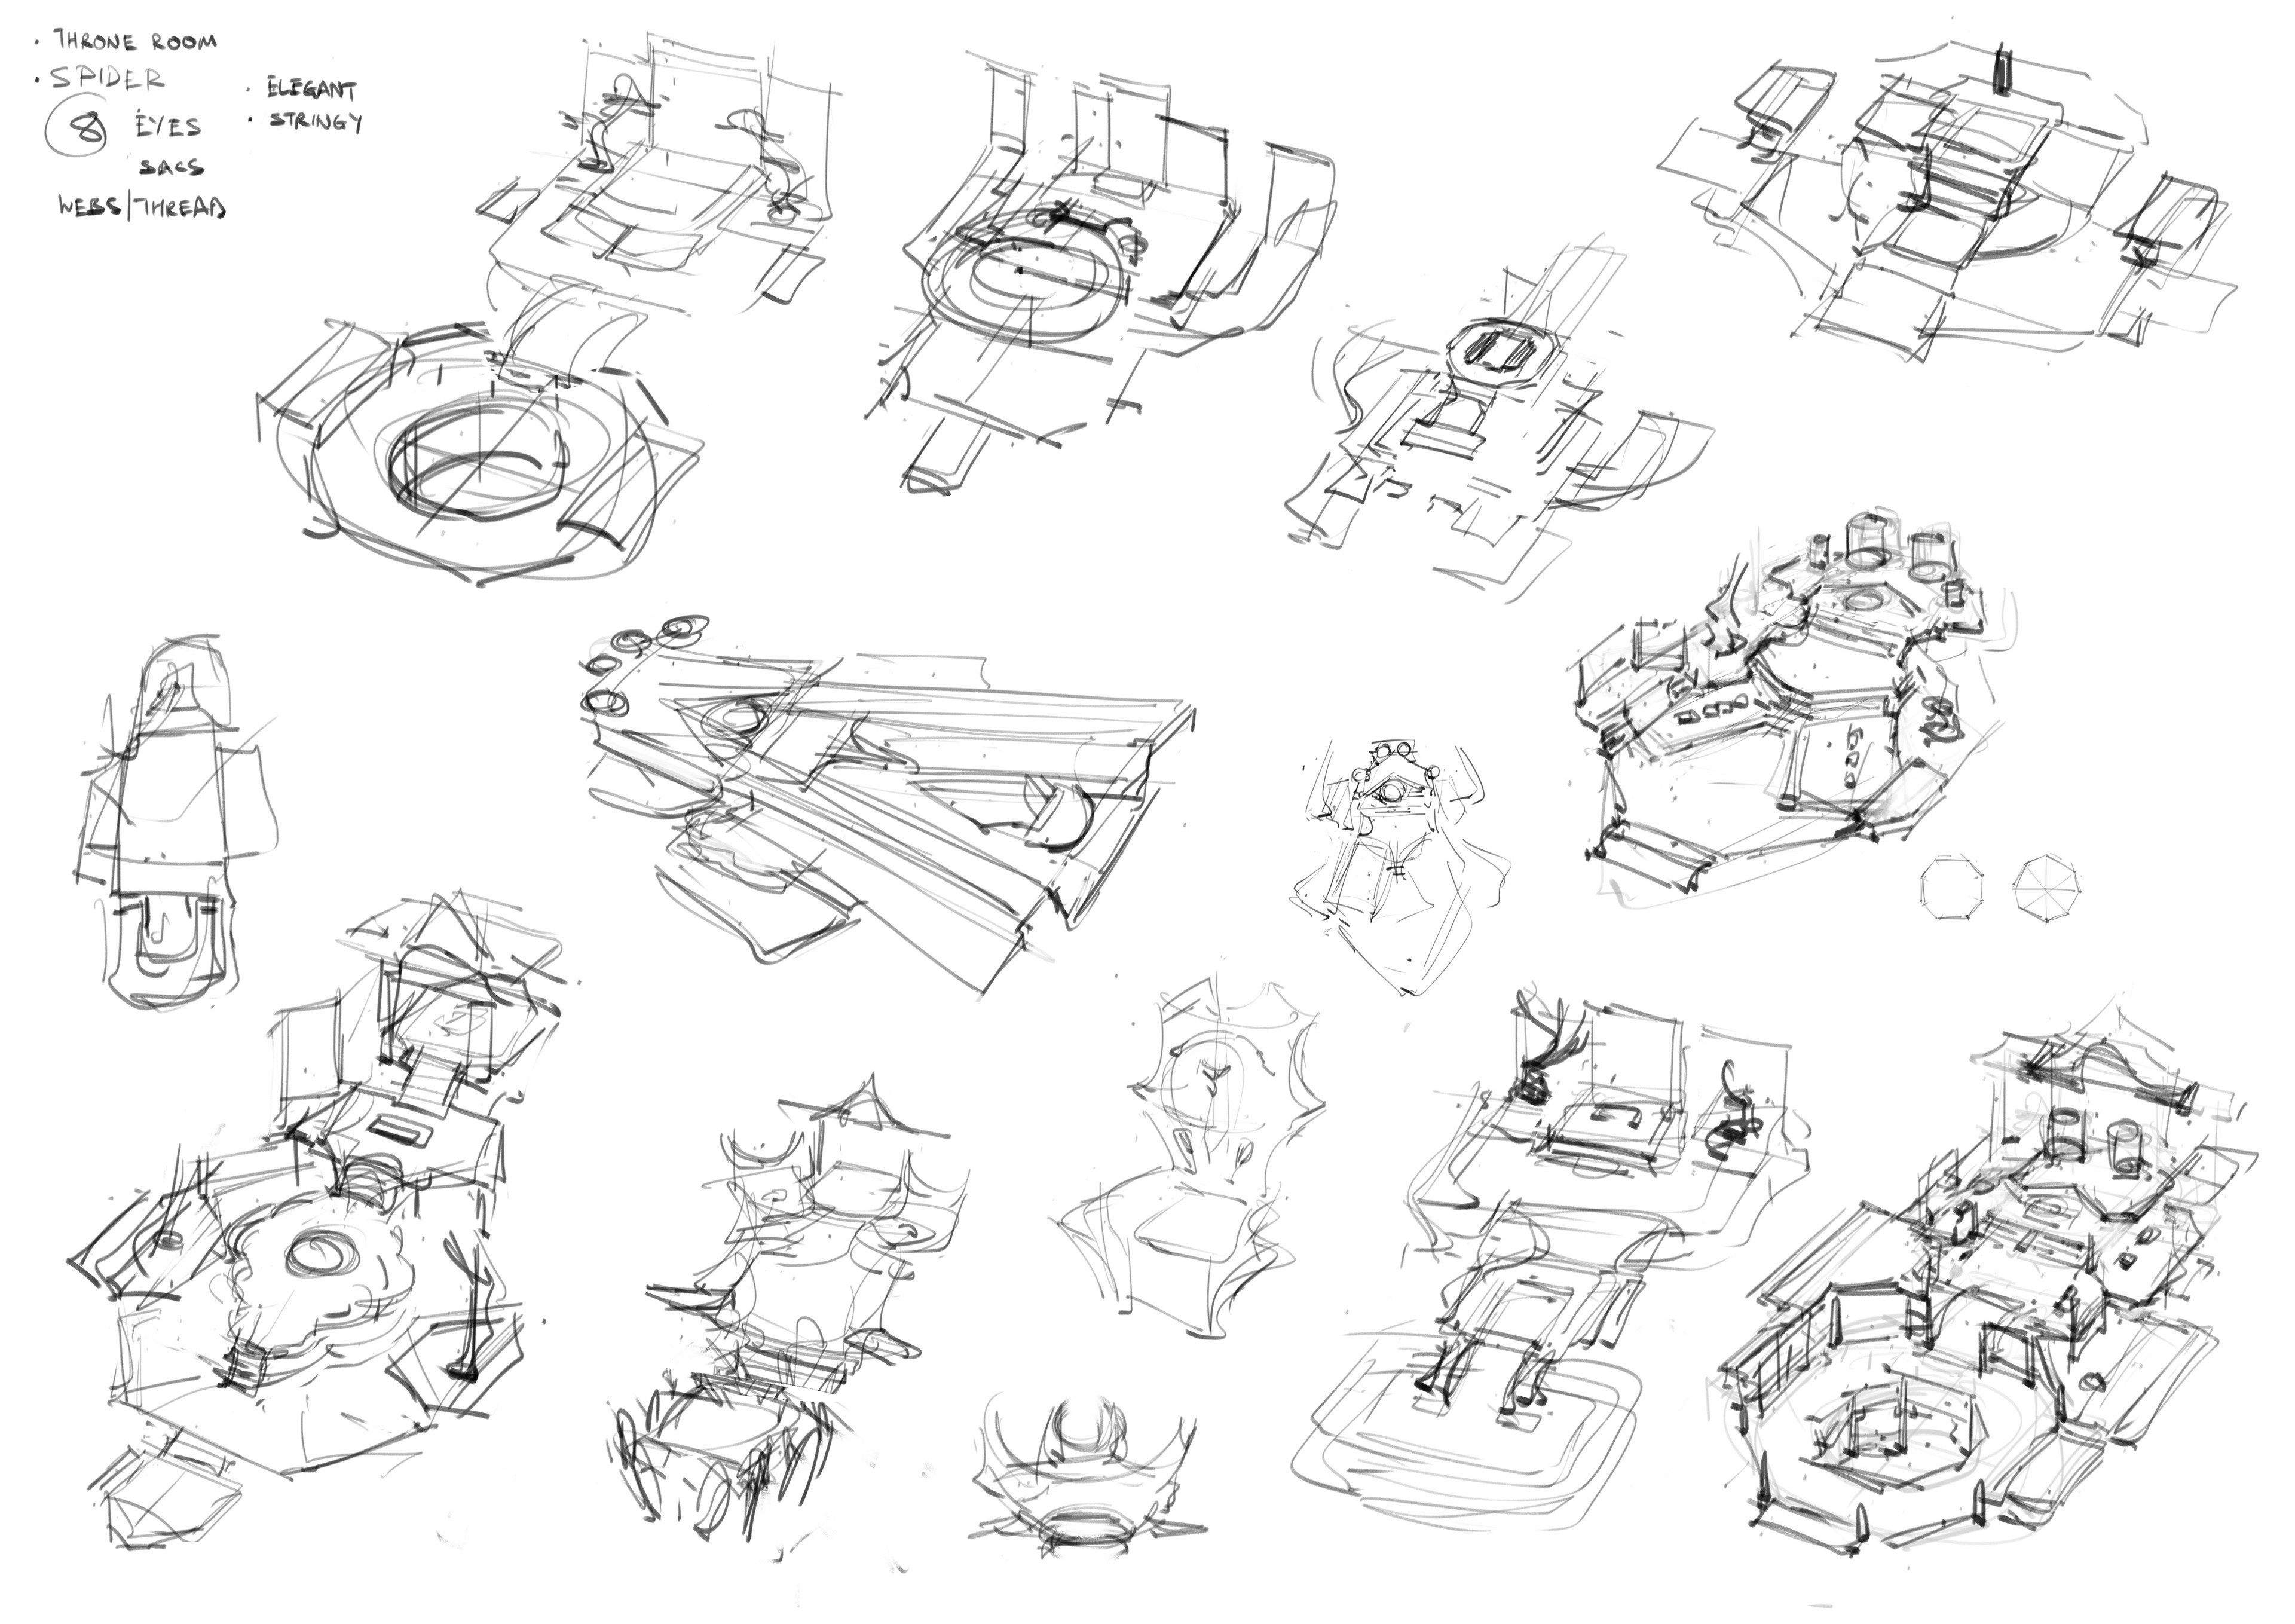 Thumbnails and Ideation